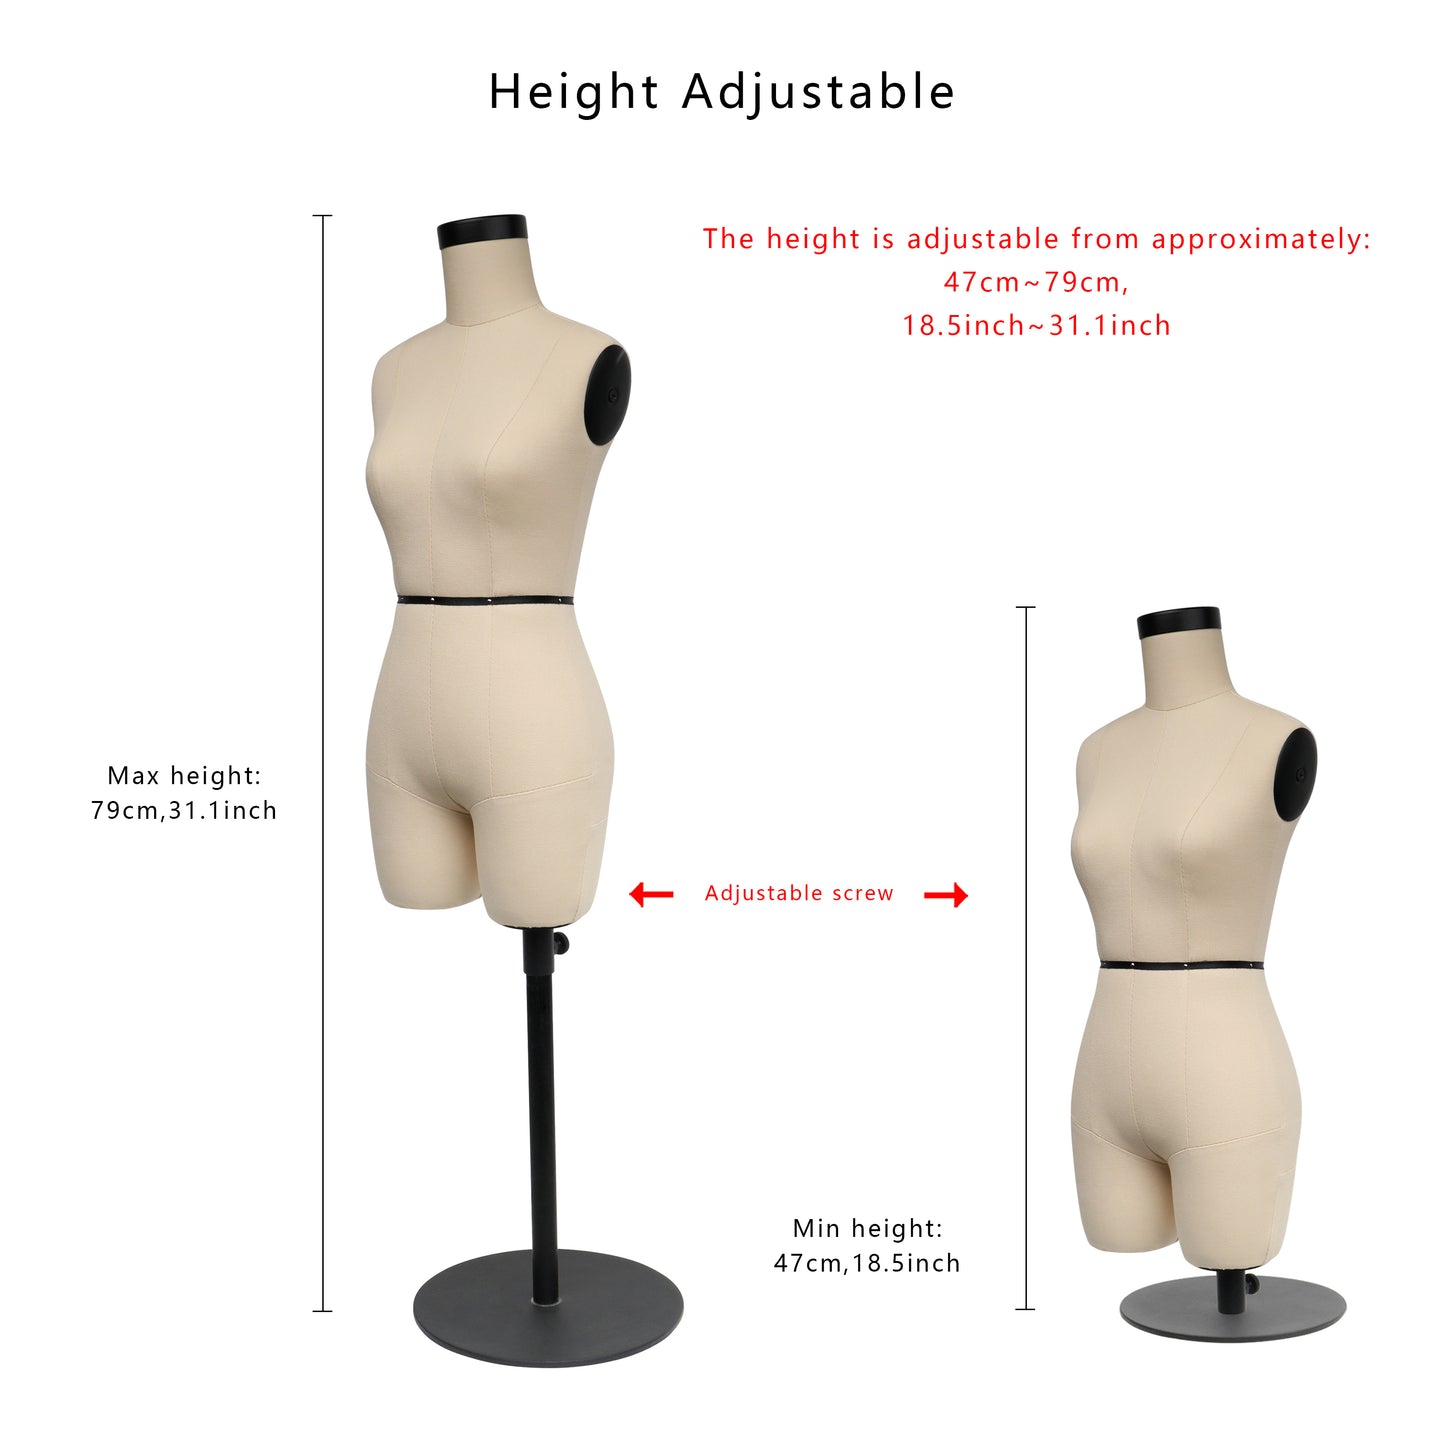 Jelimate Size 6 Female Half Scale Dress Form For Sewing,Mini Tailor Mannequin for Fashion Designer Pattern Making,Miniature Women Sewing Mannequin for Fashion School Draping Mannequin